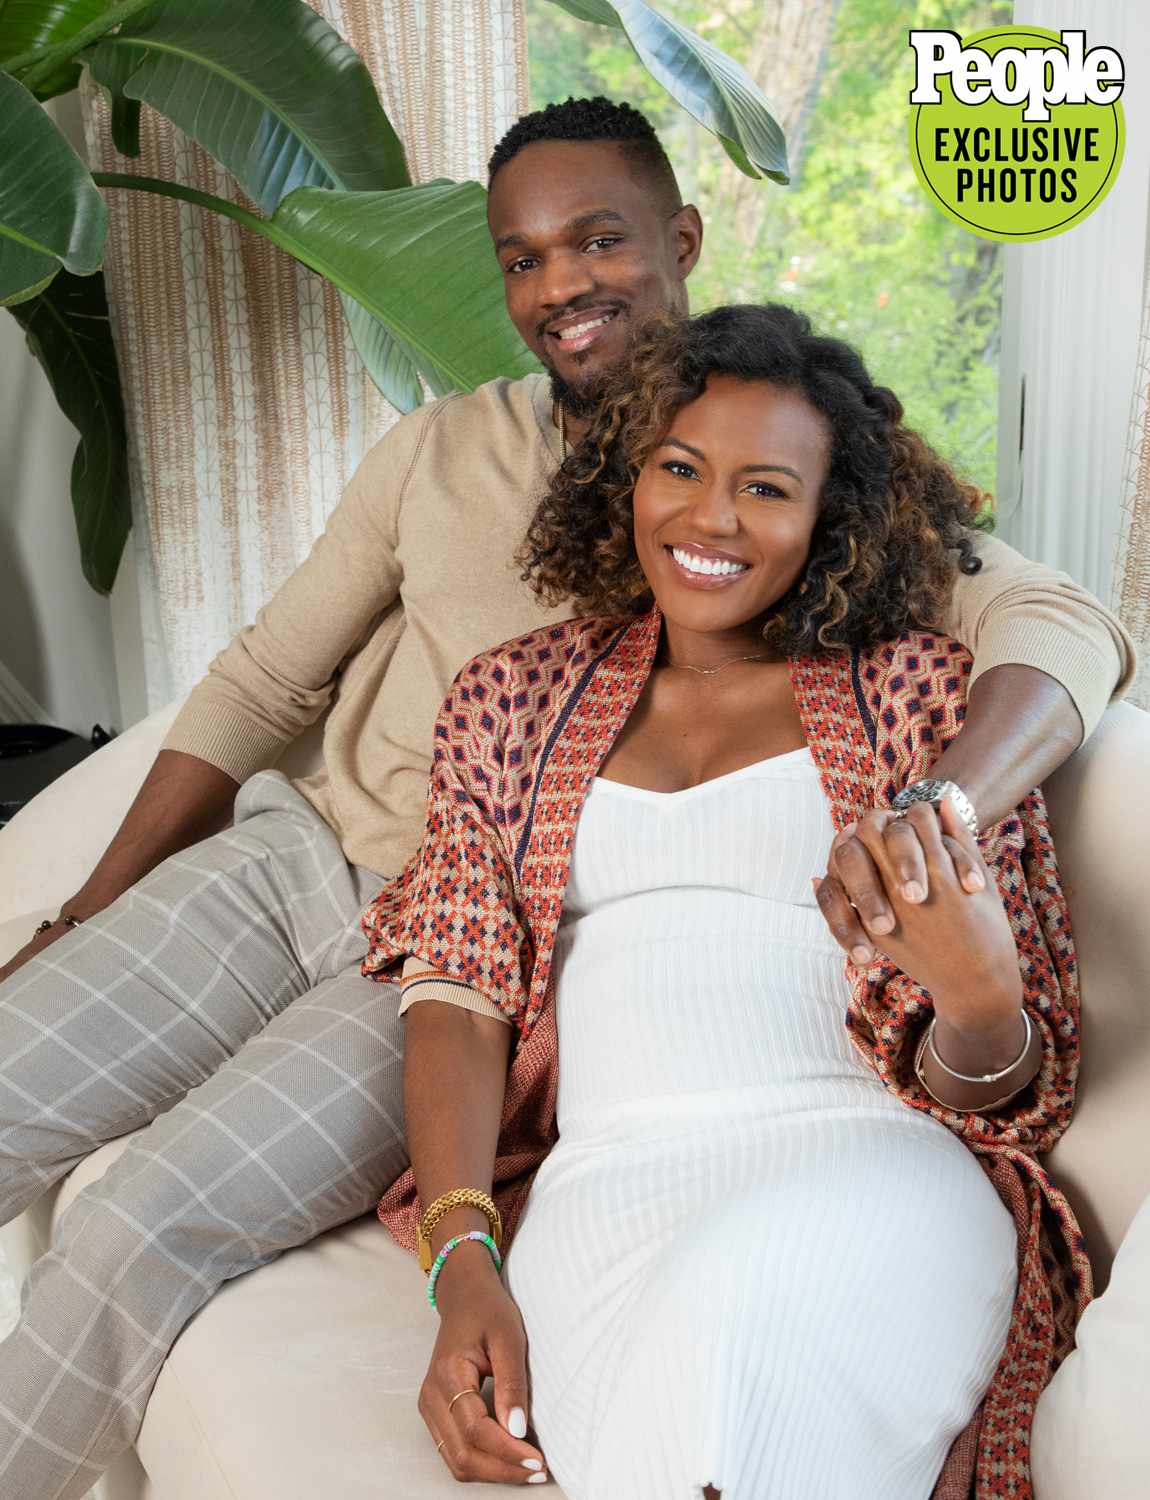 NEWS - Janai Norman at home with family for People magazine. (ABC/Heidi Gutman) JANAI NORMAN AND FAMILY